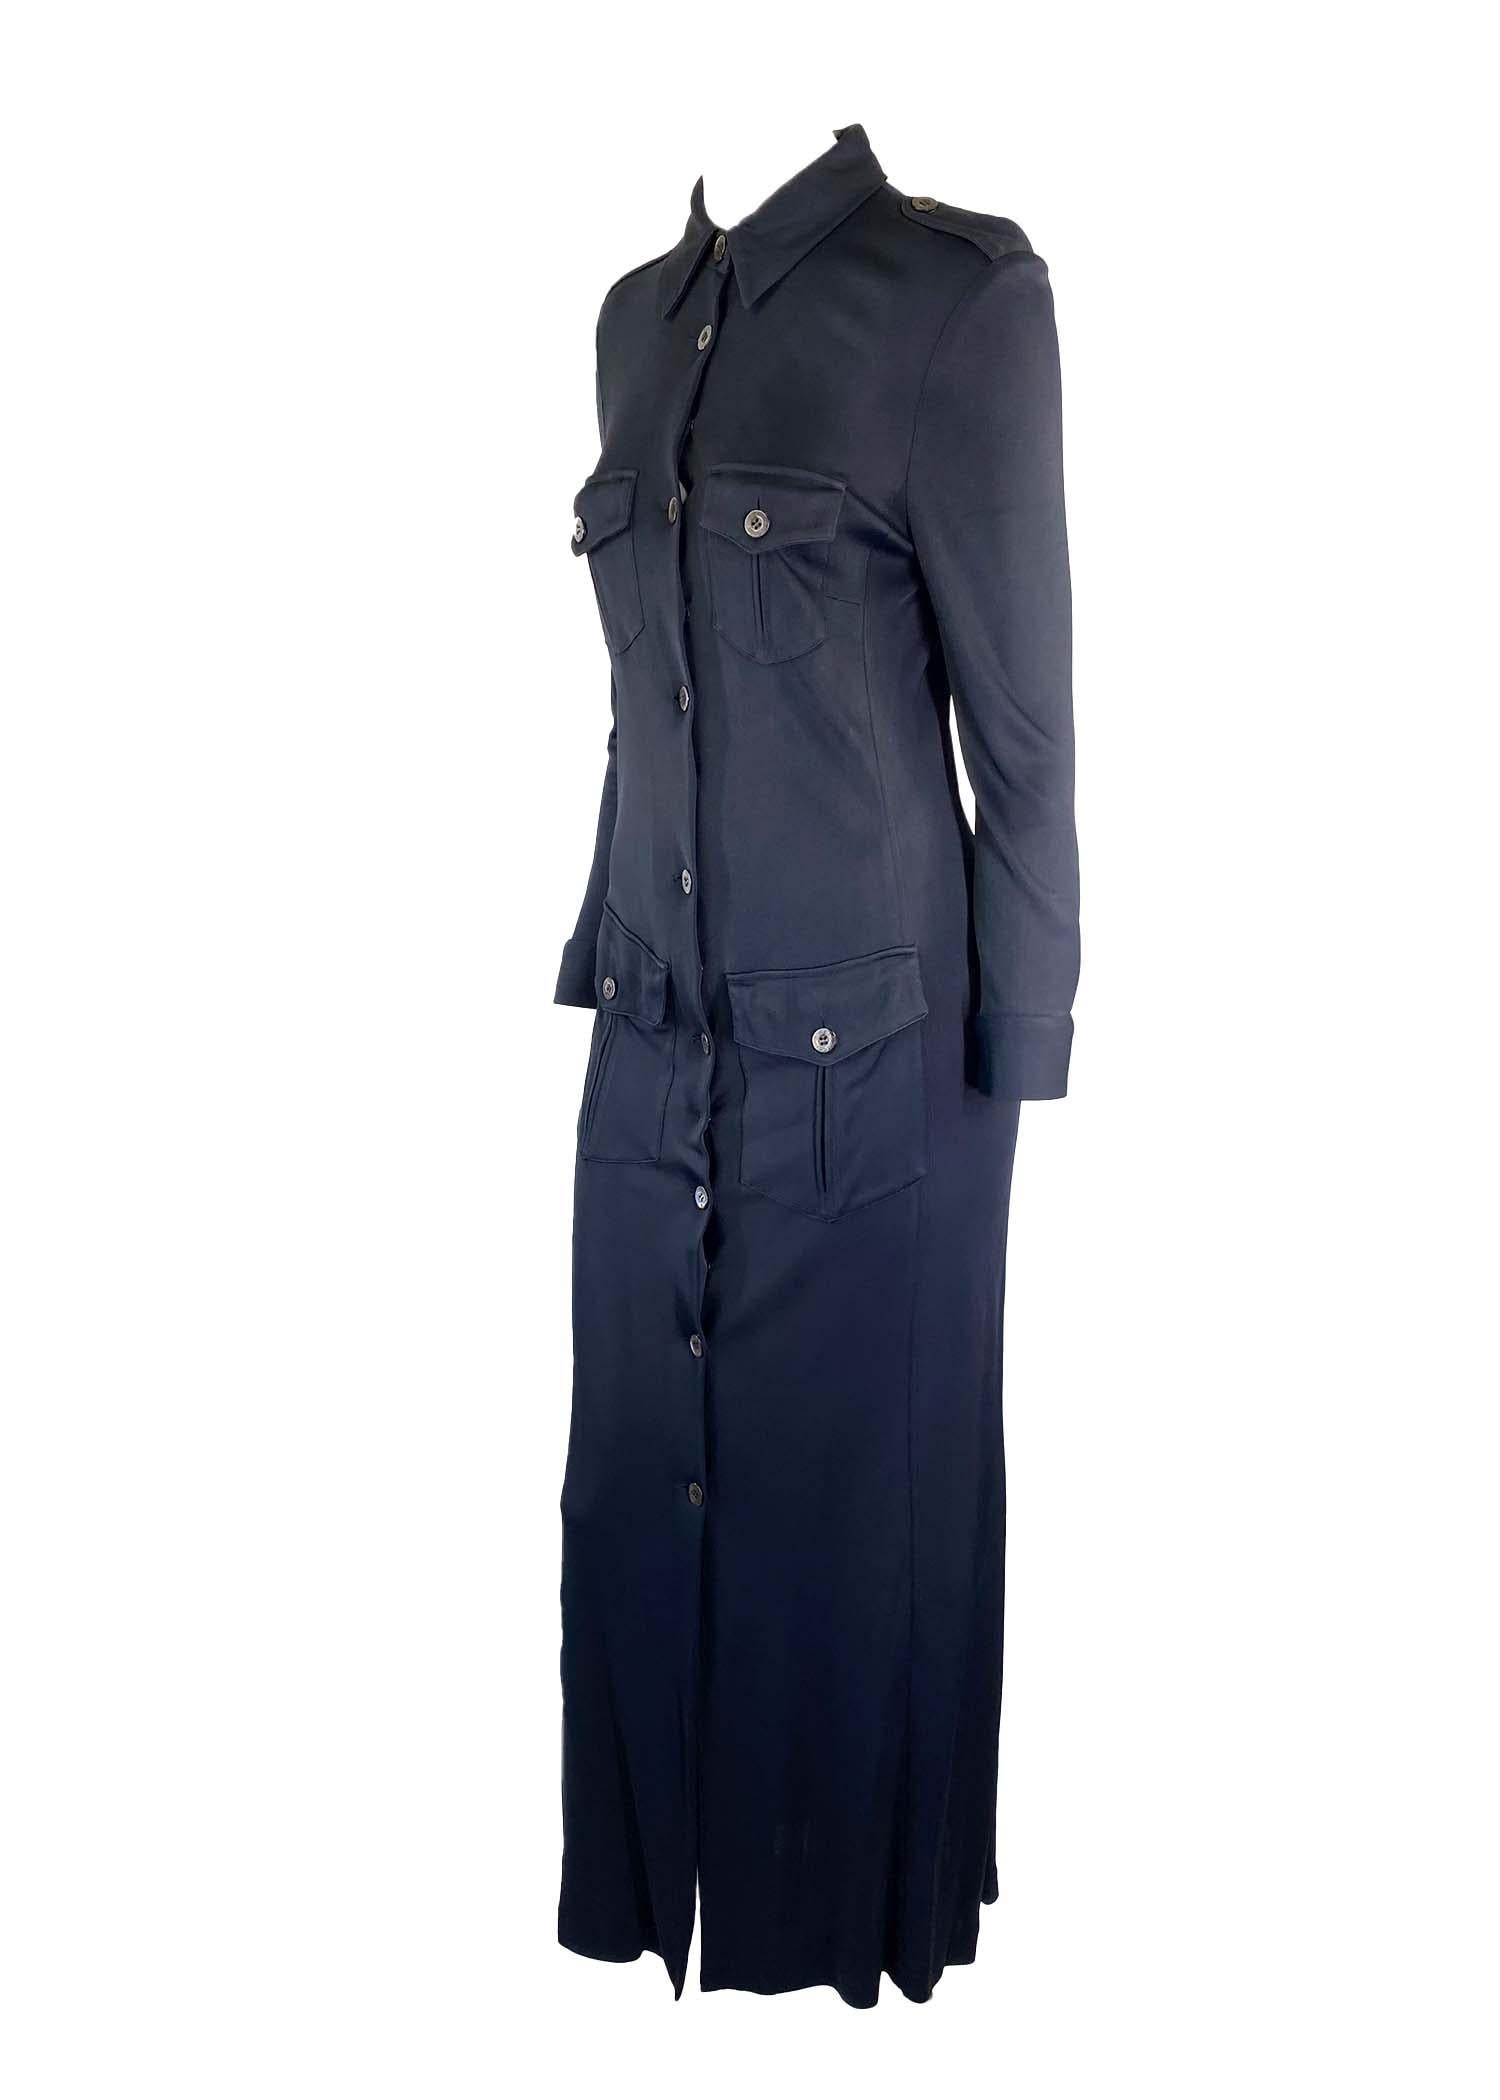 Women's S/S 1996 Gucci by Tom Ford Nicole Kidman Navy Viscose Maxi Dress with Tie  For Sale